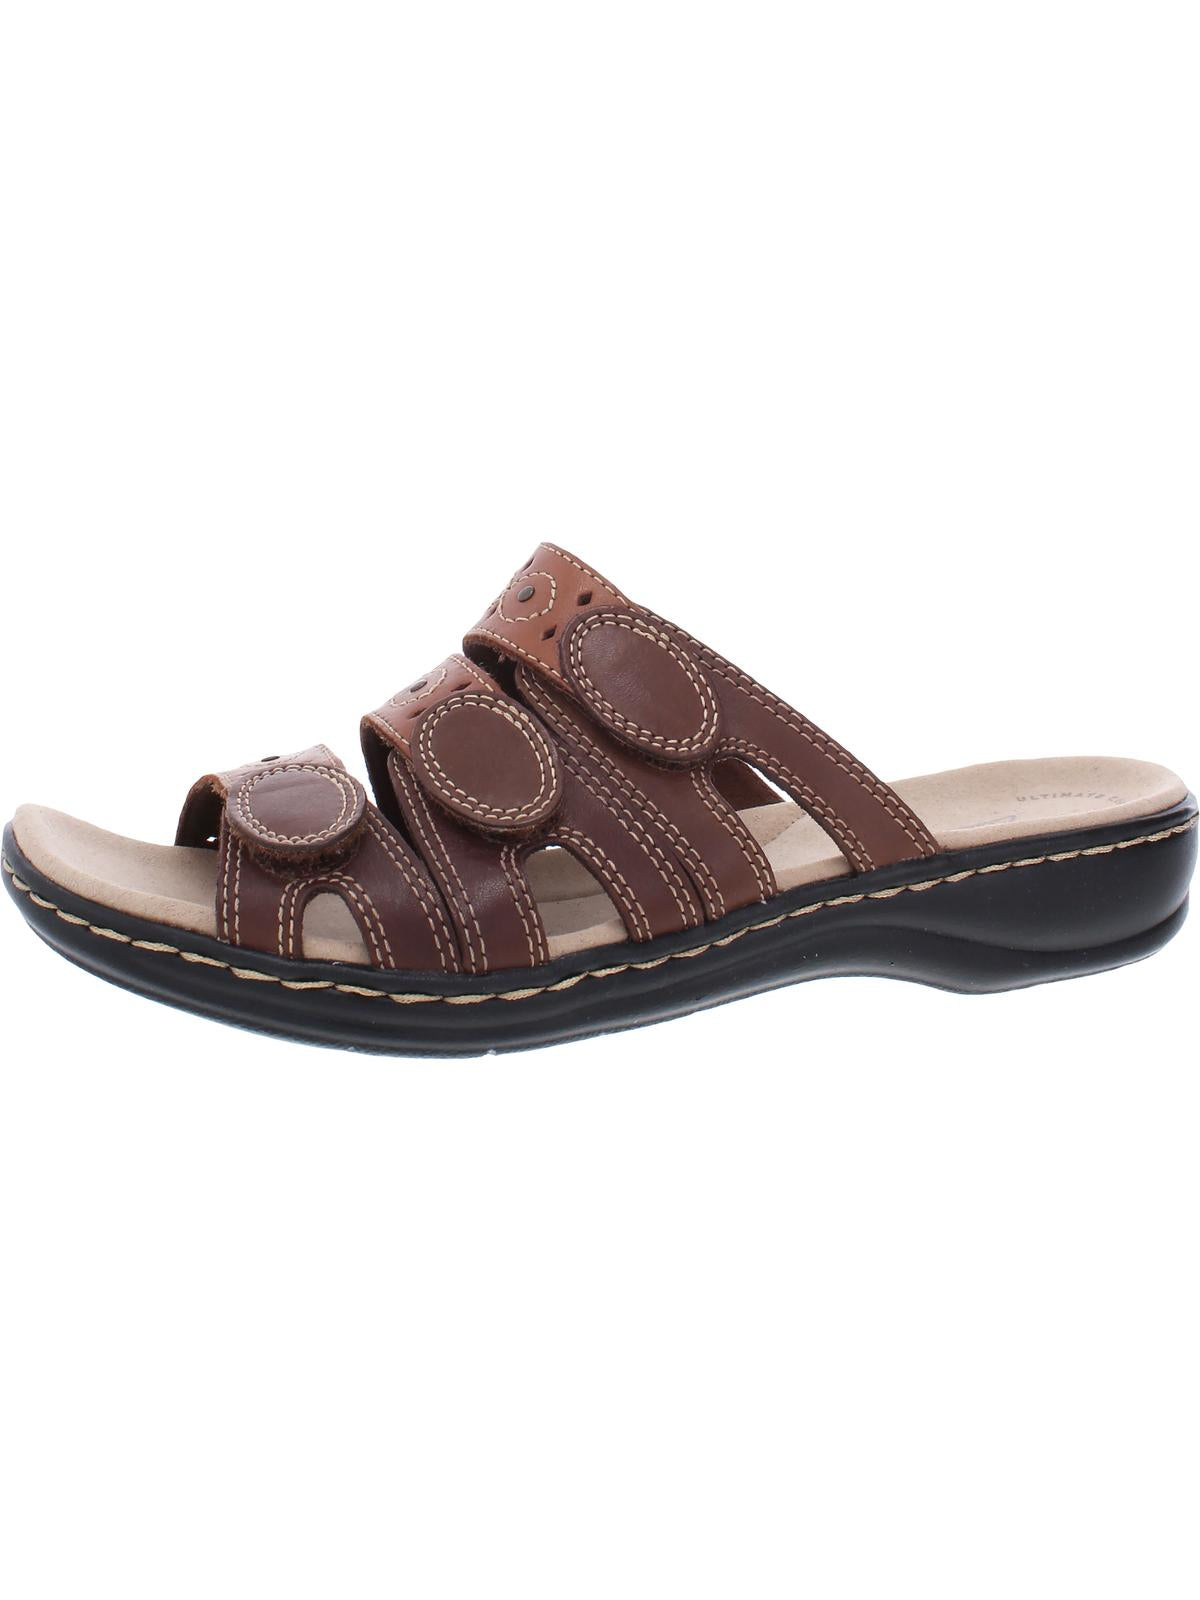 Clarks Leisa Cacti Q Womens Leather Embellished Wedge Sandals In Brown